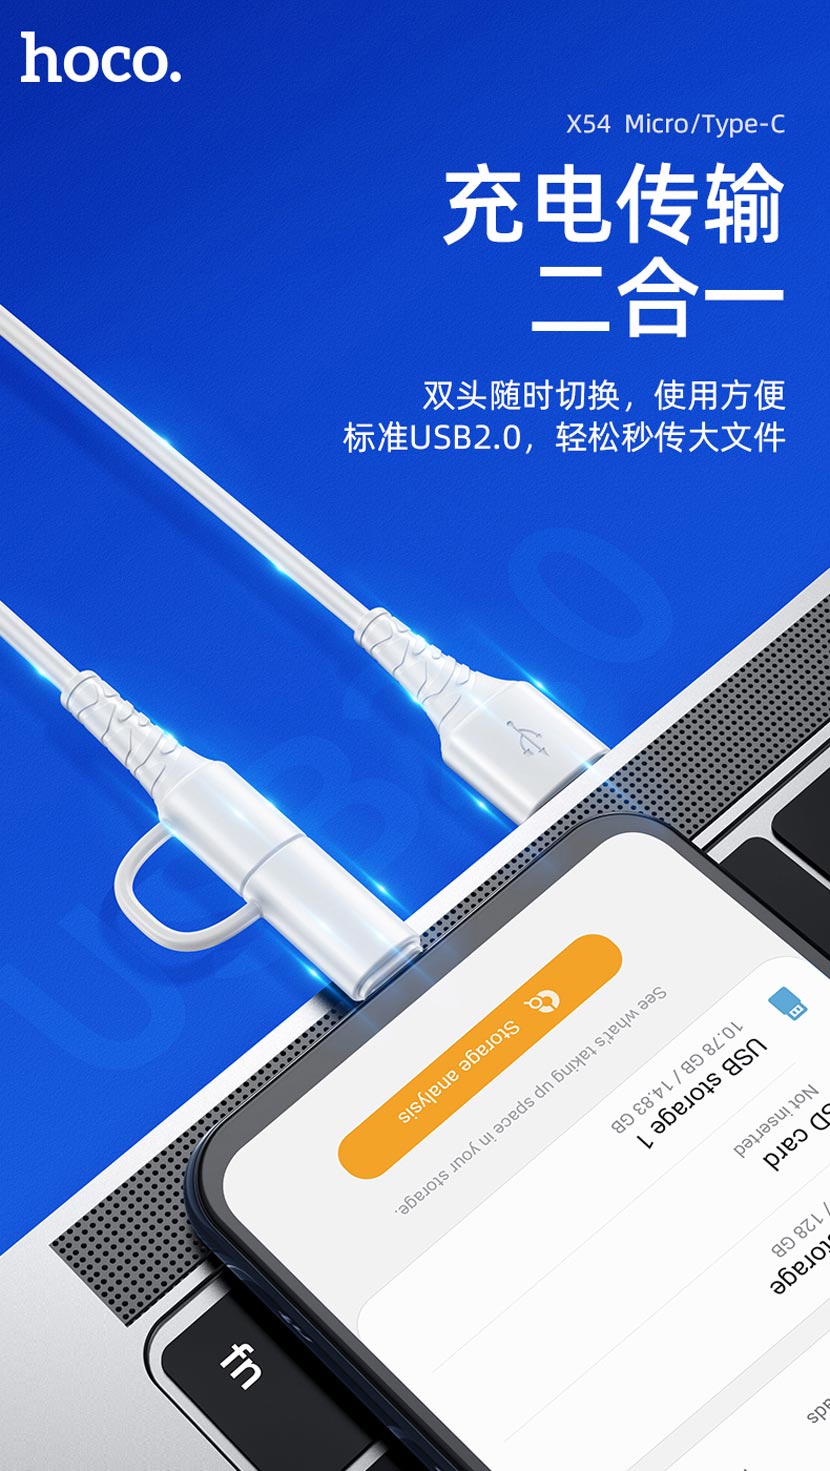 hoco news x54 cool dual 2in1 charging data cable transmission cn